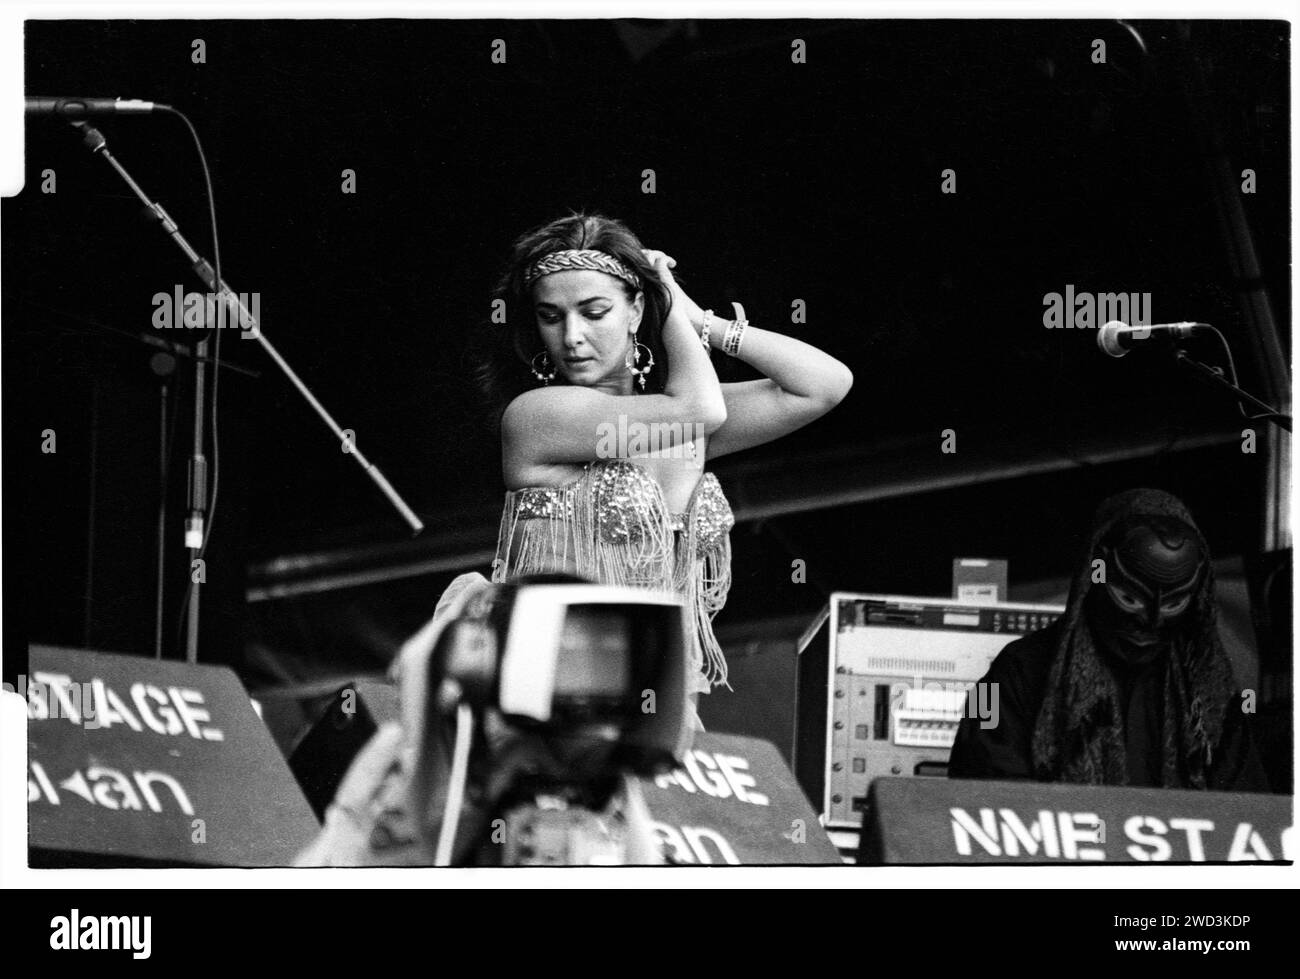 Natasha Atlas of Transglobal underground on the NME Stage at Glastonbury Festival, Pilton, England, on 25 June 1994. Photo: ROB WATKINS. INFO: Transglobal Underground, a British world fusion and electronic band formed in the early '90s, pioneered a global sound. Fusing traditional instruments with modern beats, albums like "Dream of 100 Nations" established them as trailblazers in the world music and electronic genres. Stock Photo